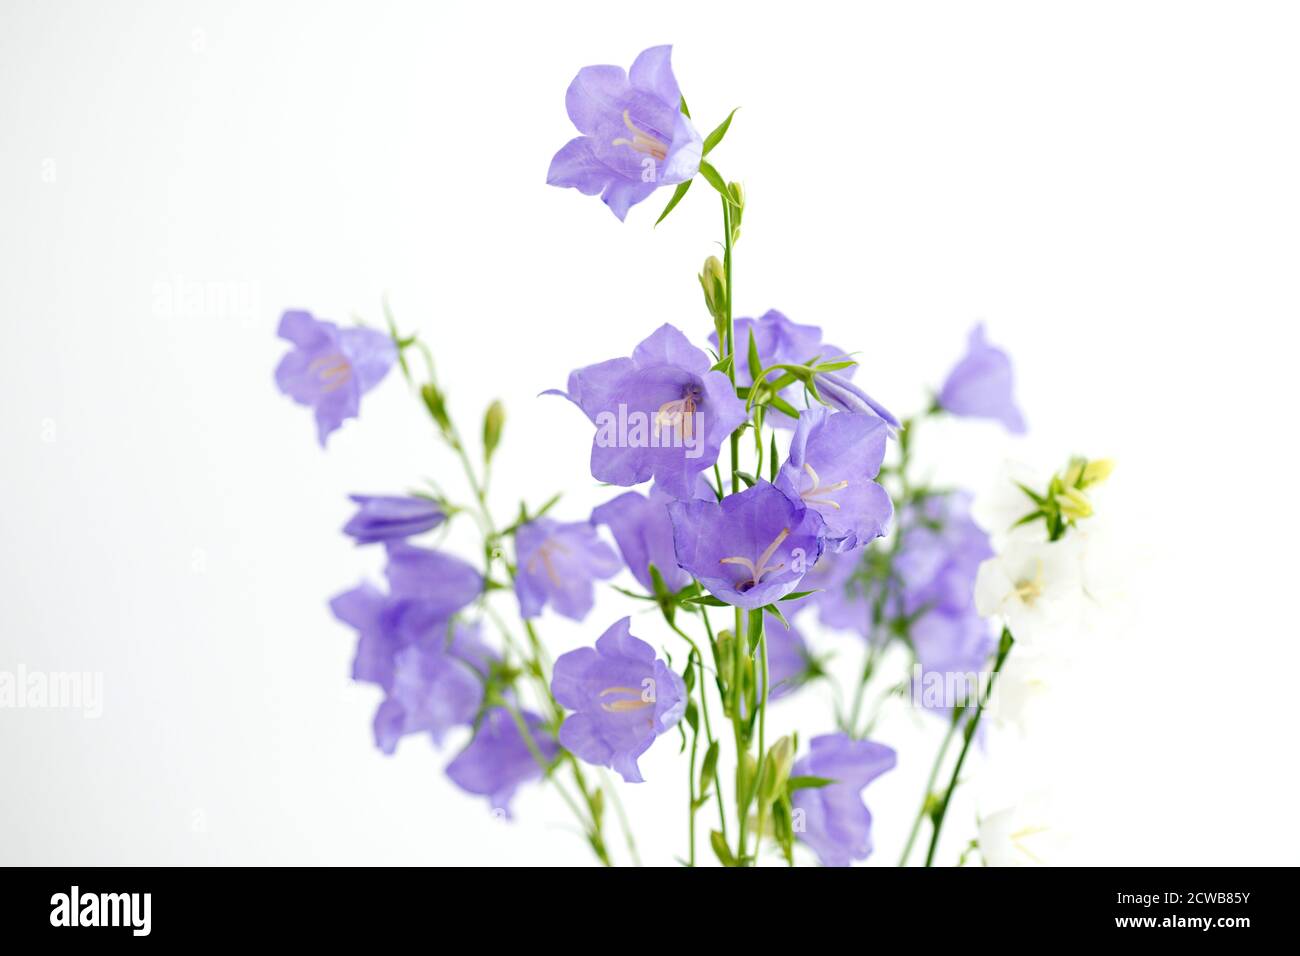 Bouquet of flowers Purple bells on a white background Stock Photo